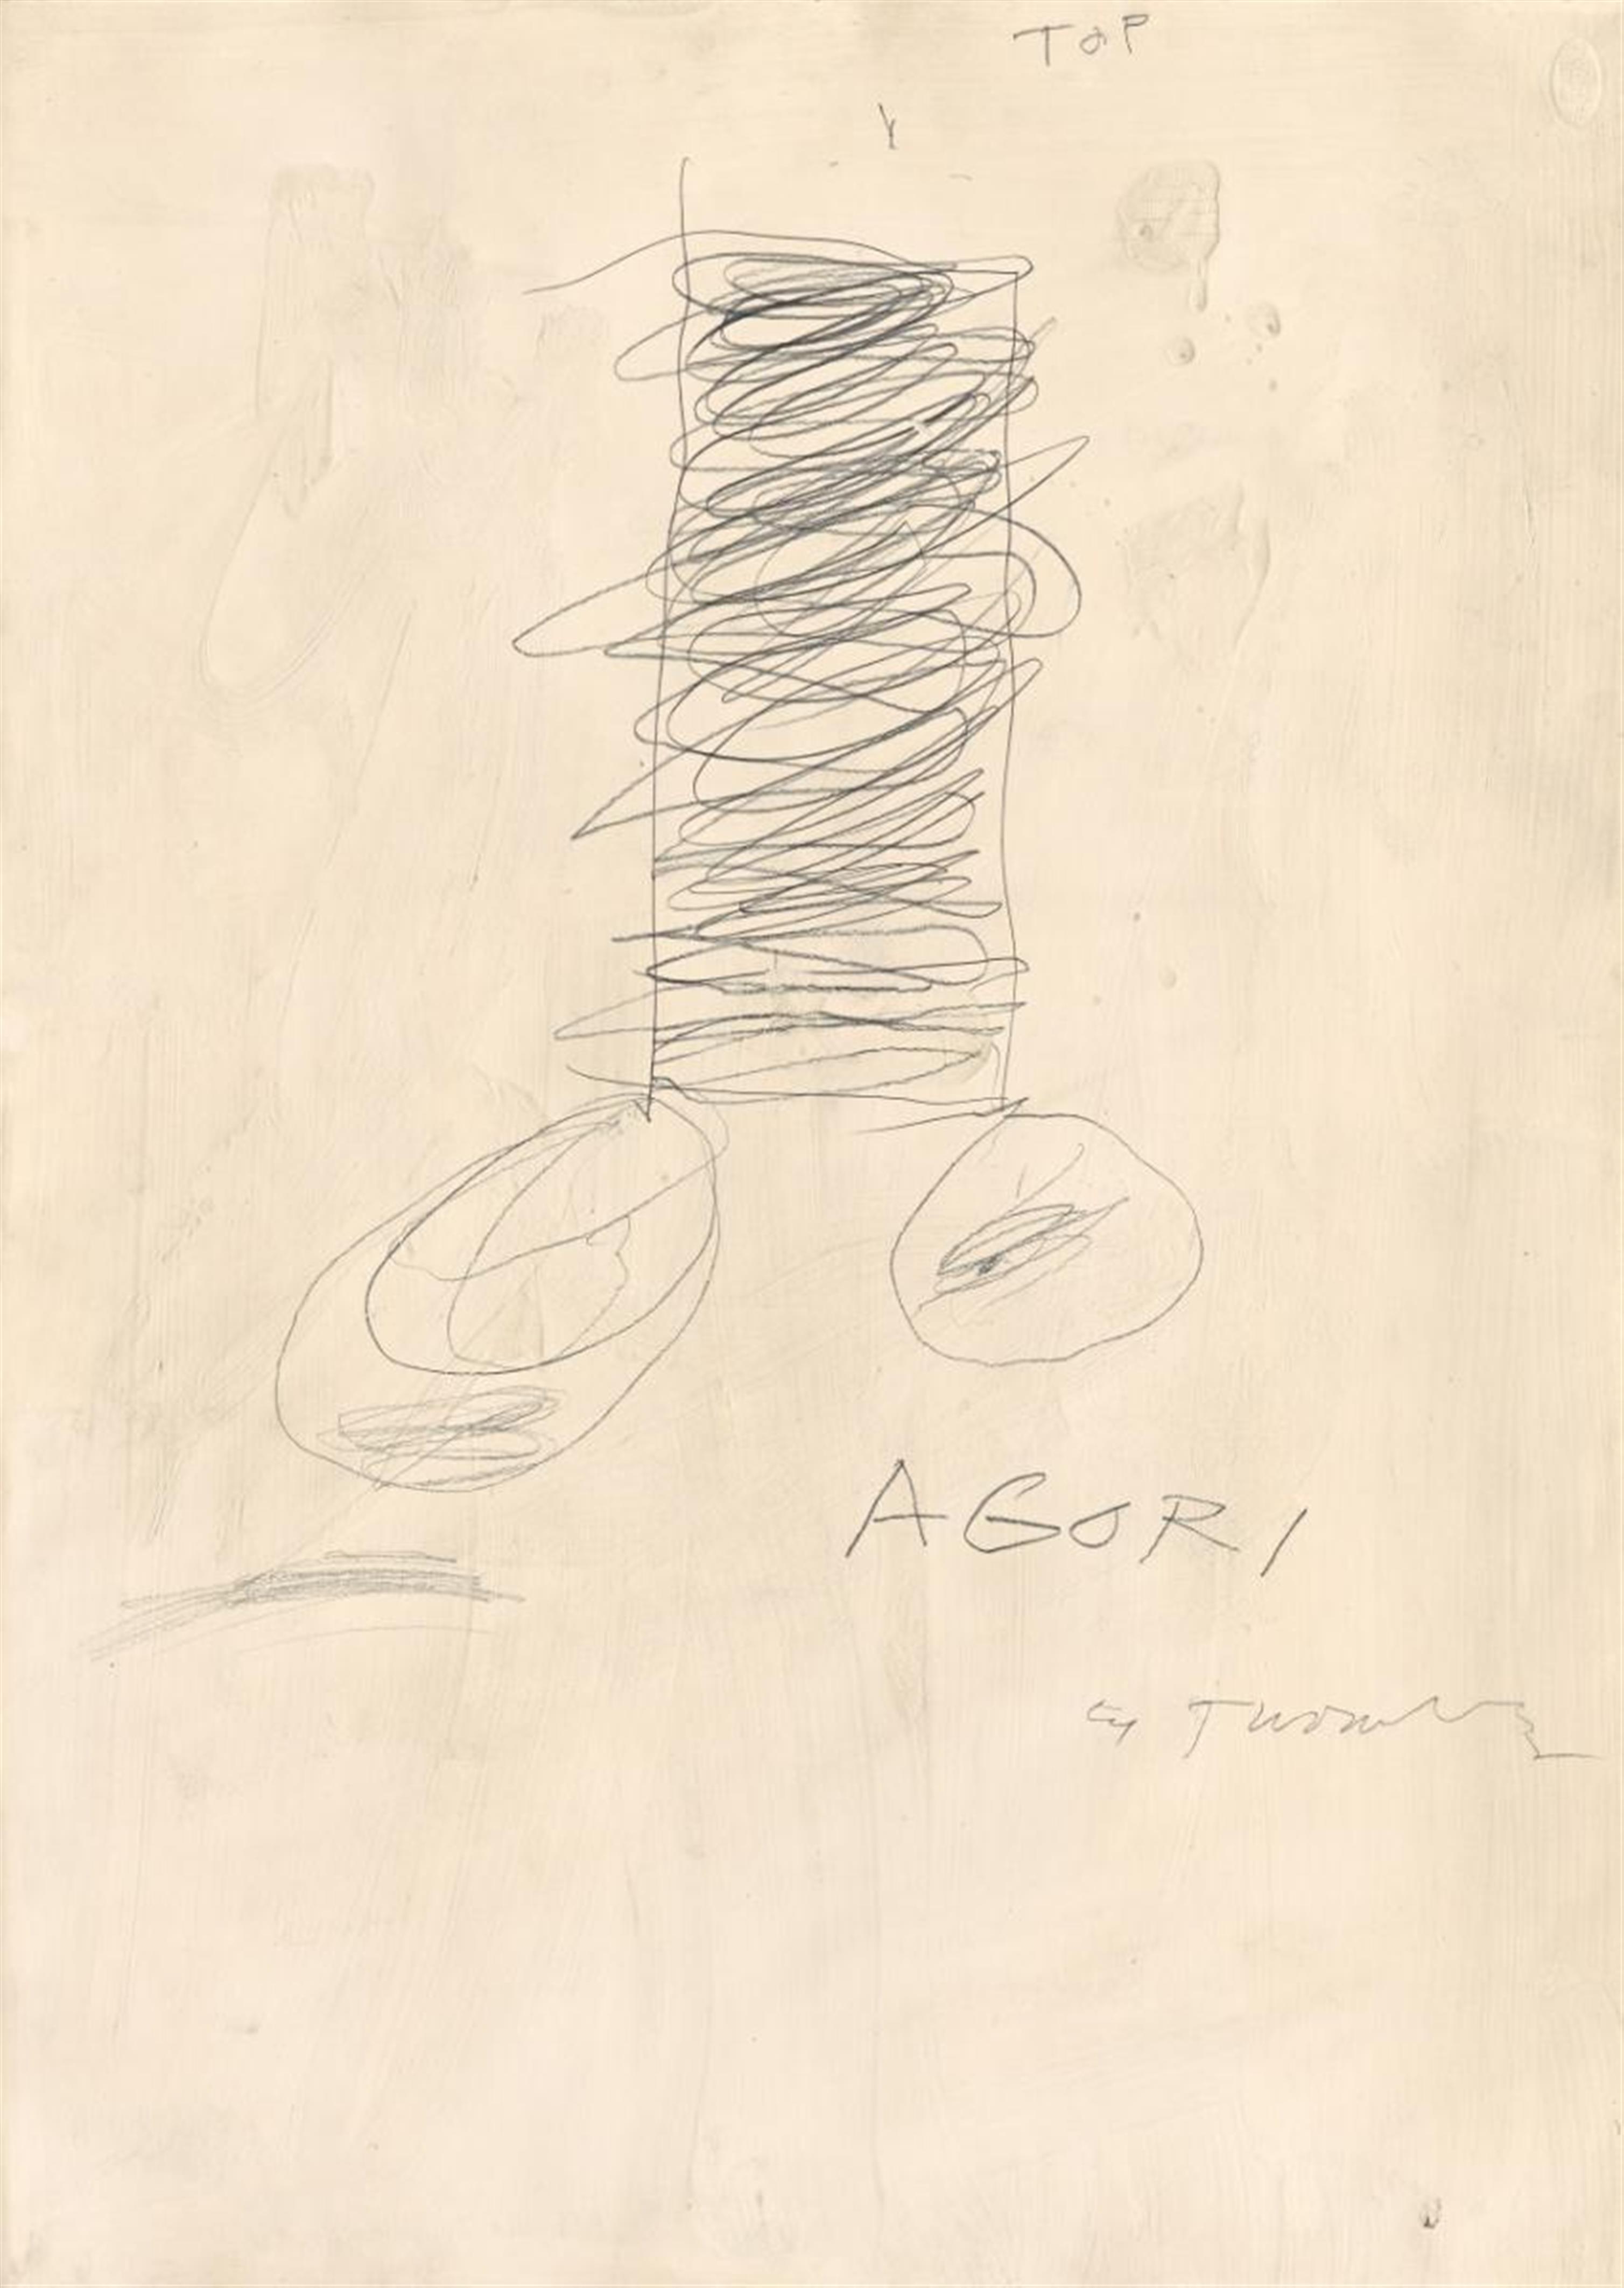 Cy Twombly - Agori - image-1